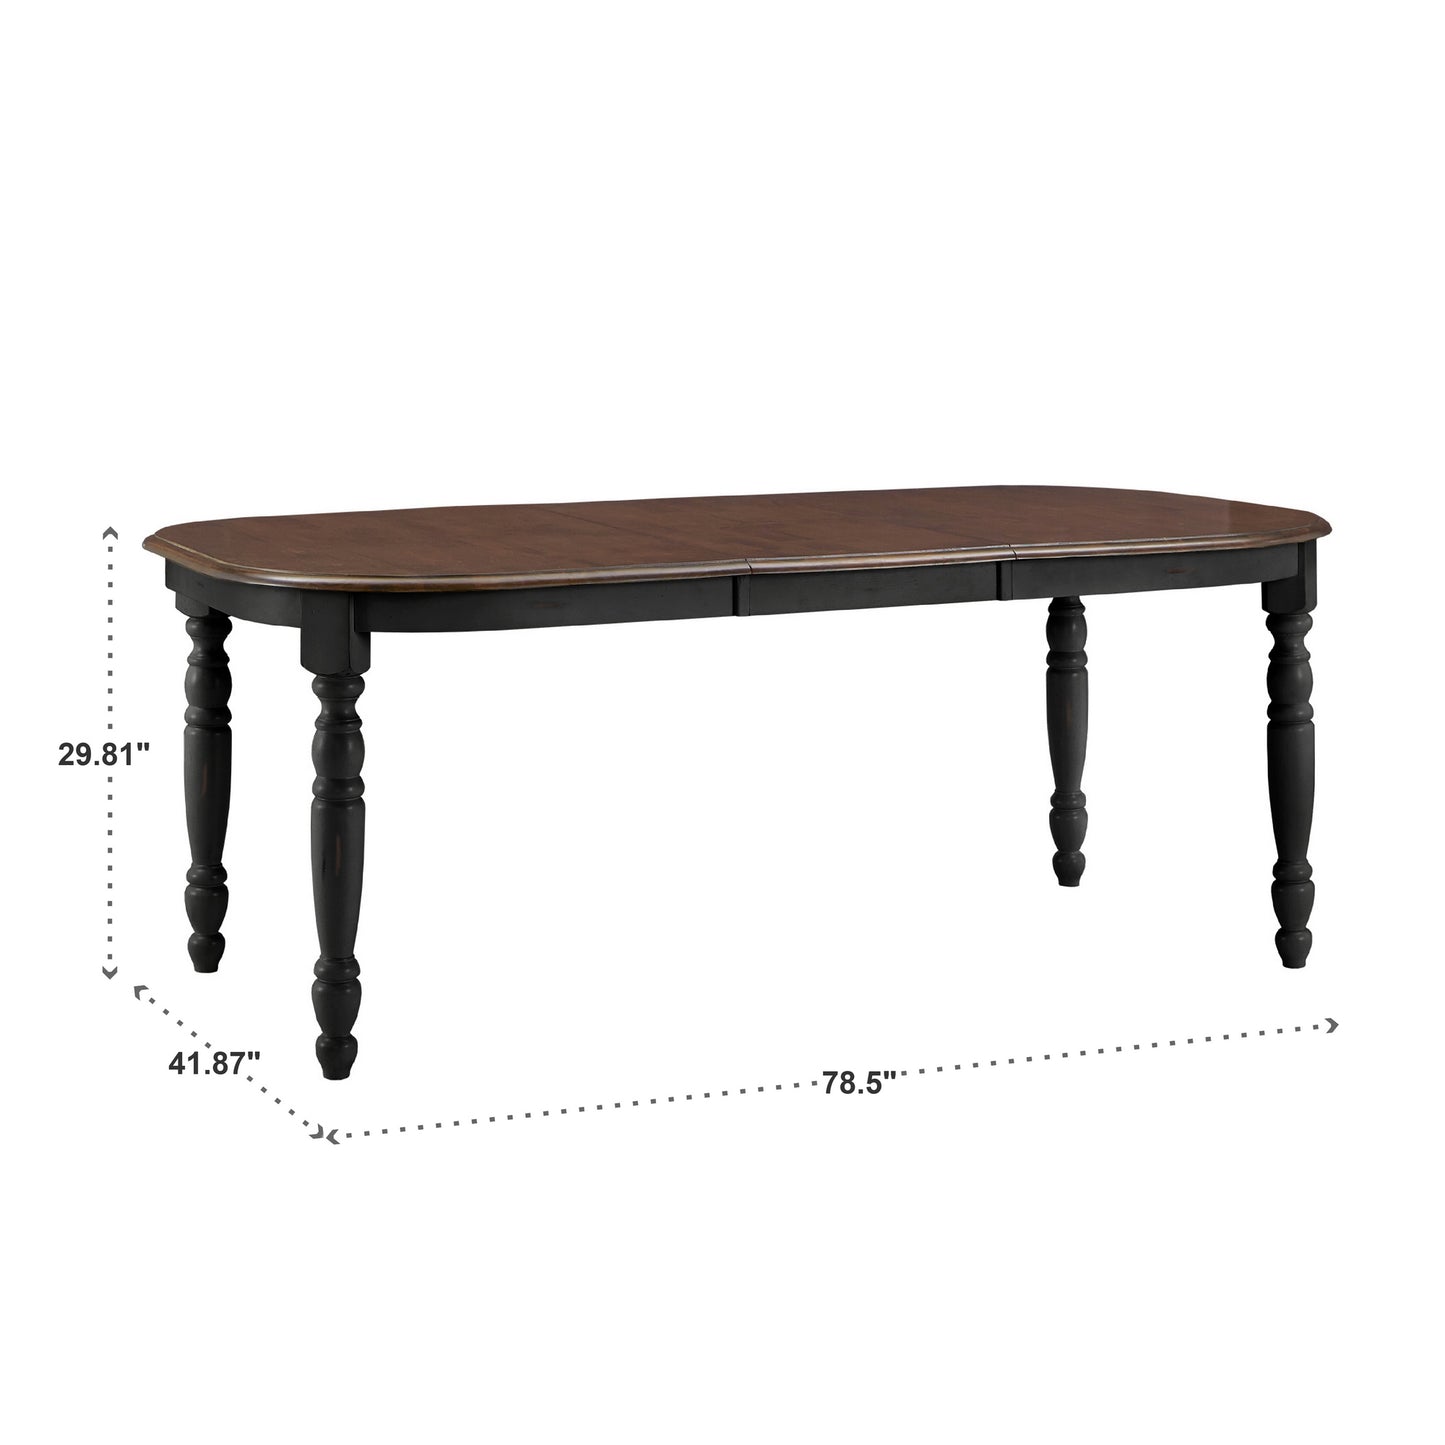 Antique Two-Tone Extending Dining Table - Antique Black